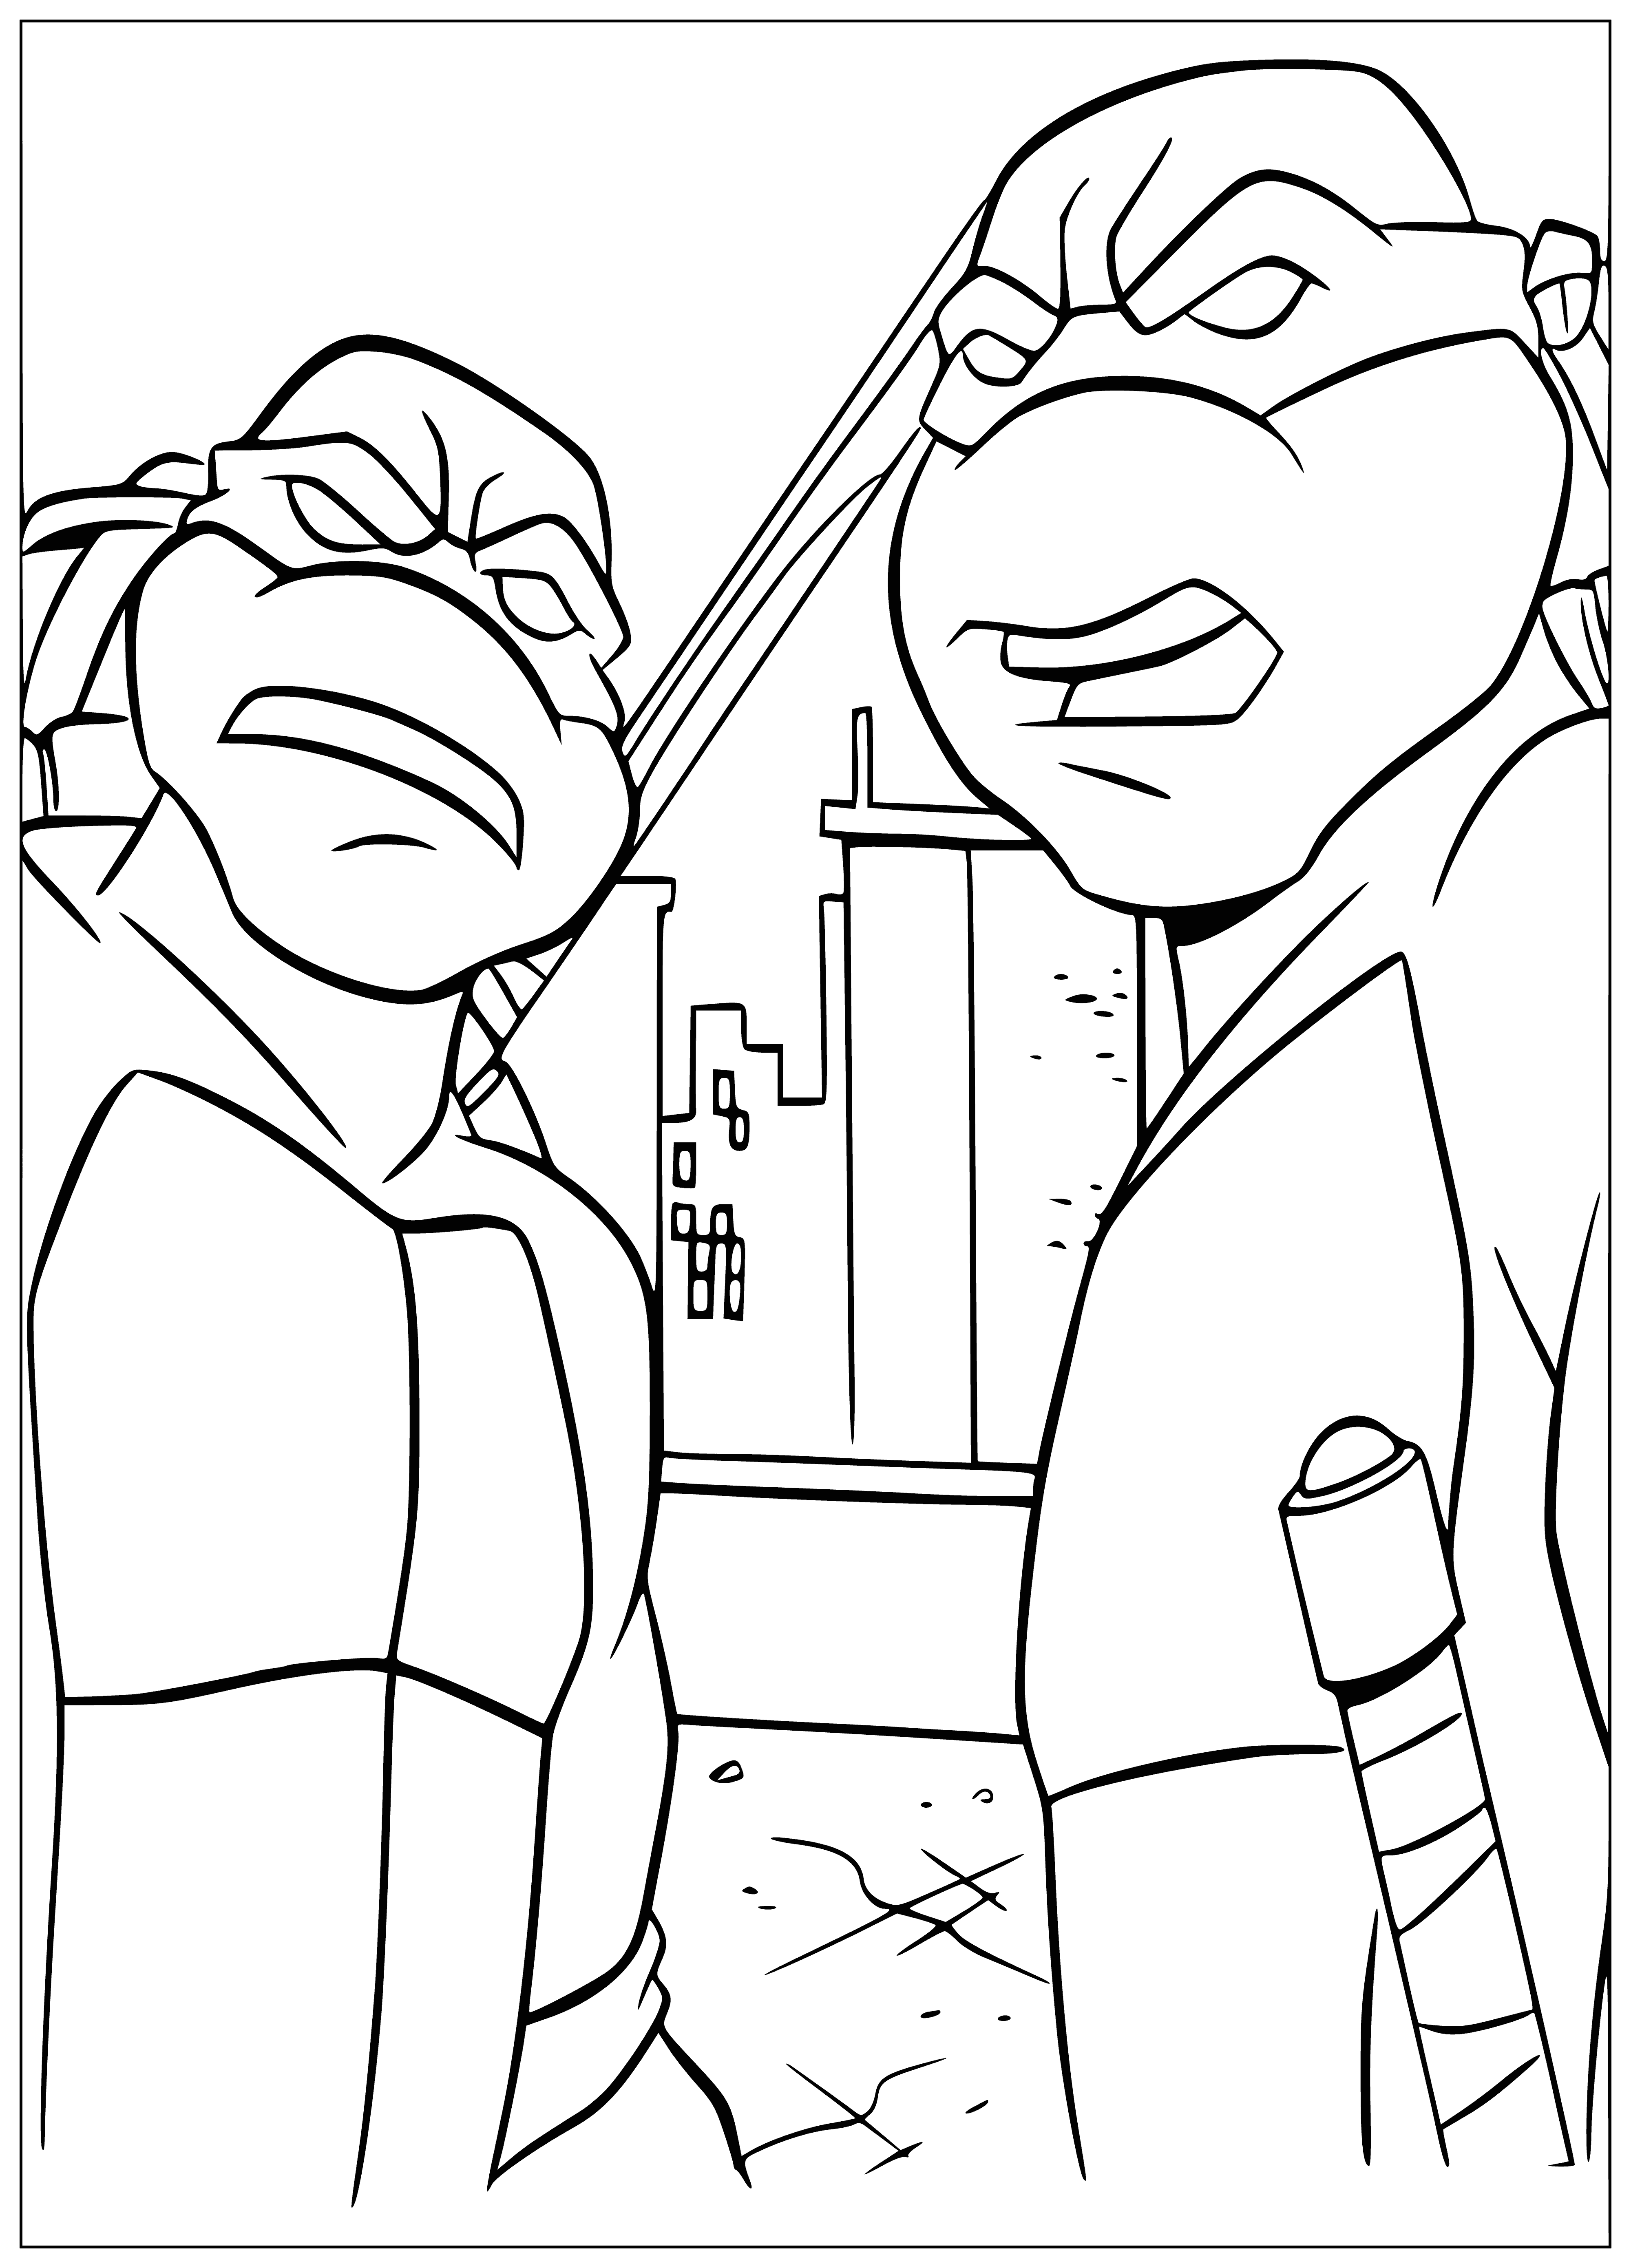 coloring page: The TMNT are four teenaged mutant ninja turtles, trained by their sensei Splinter to fight crime. They often team up with other allies for their adventures, inspired by comic book superheroes.